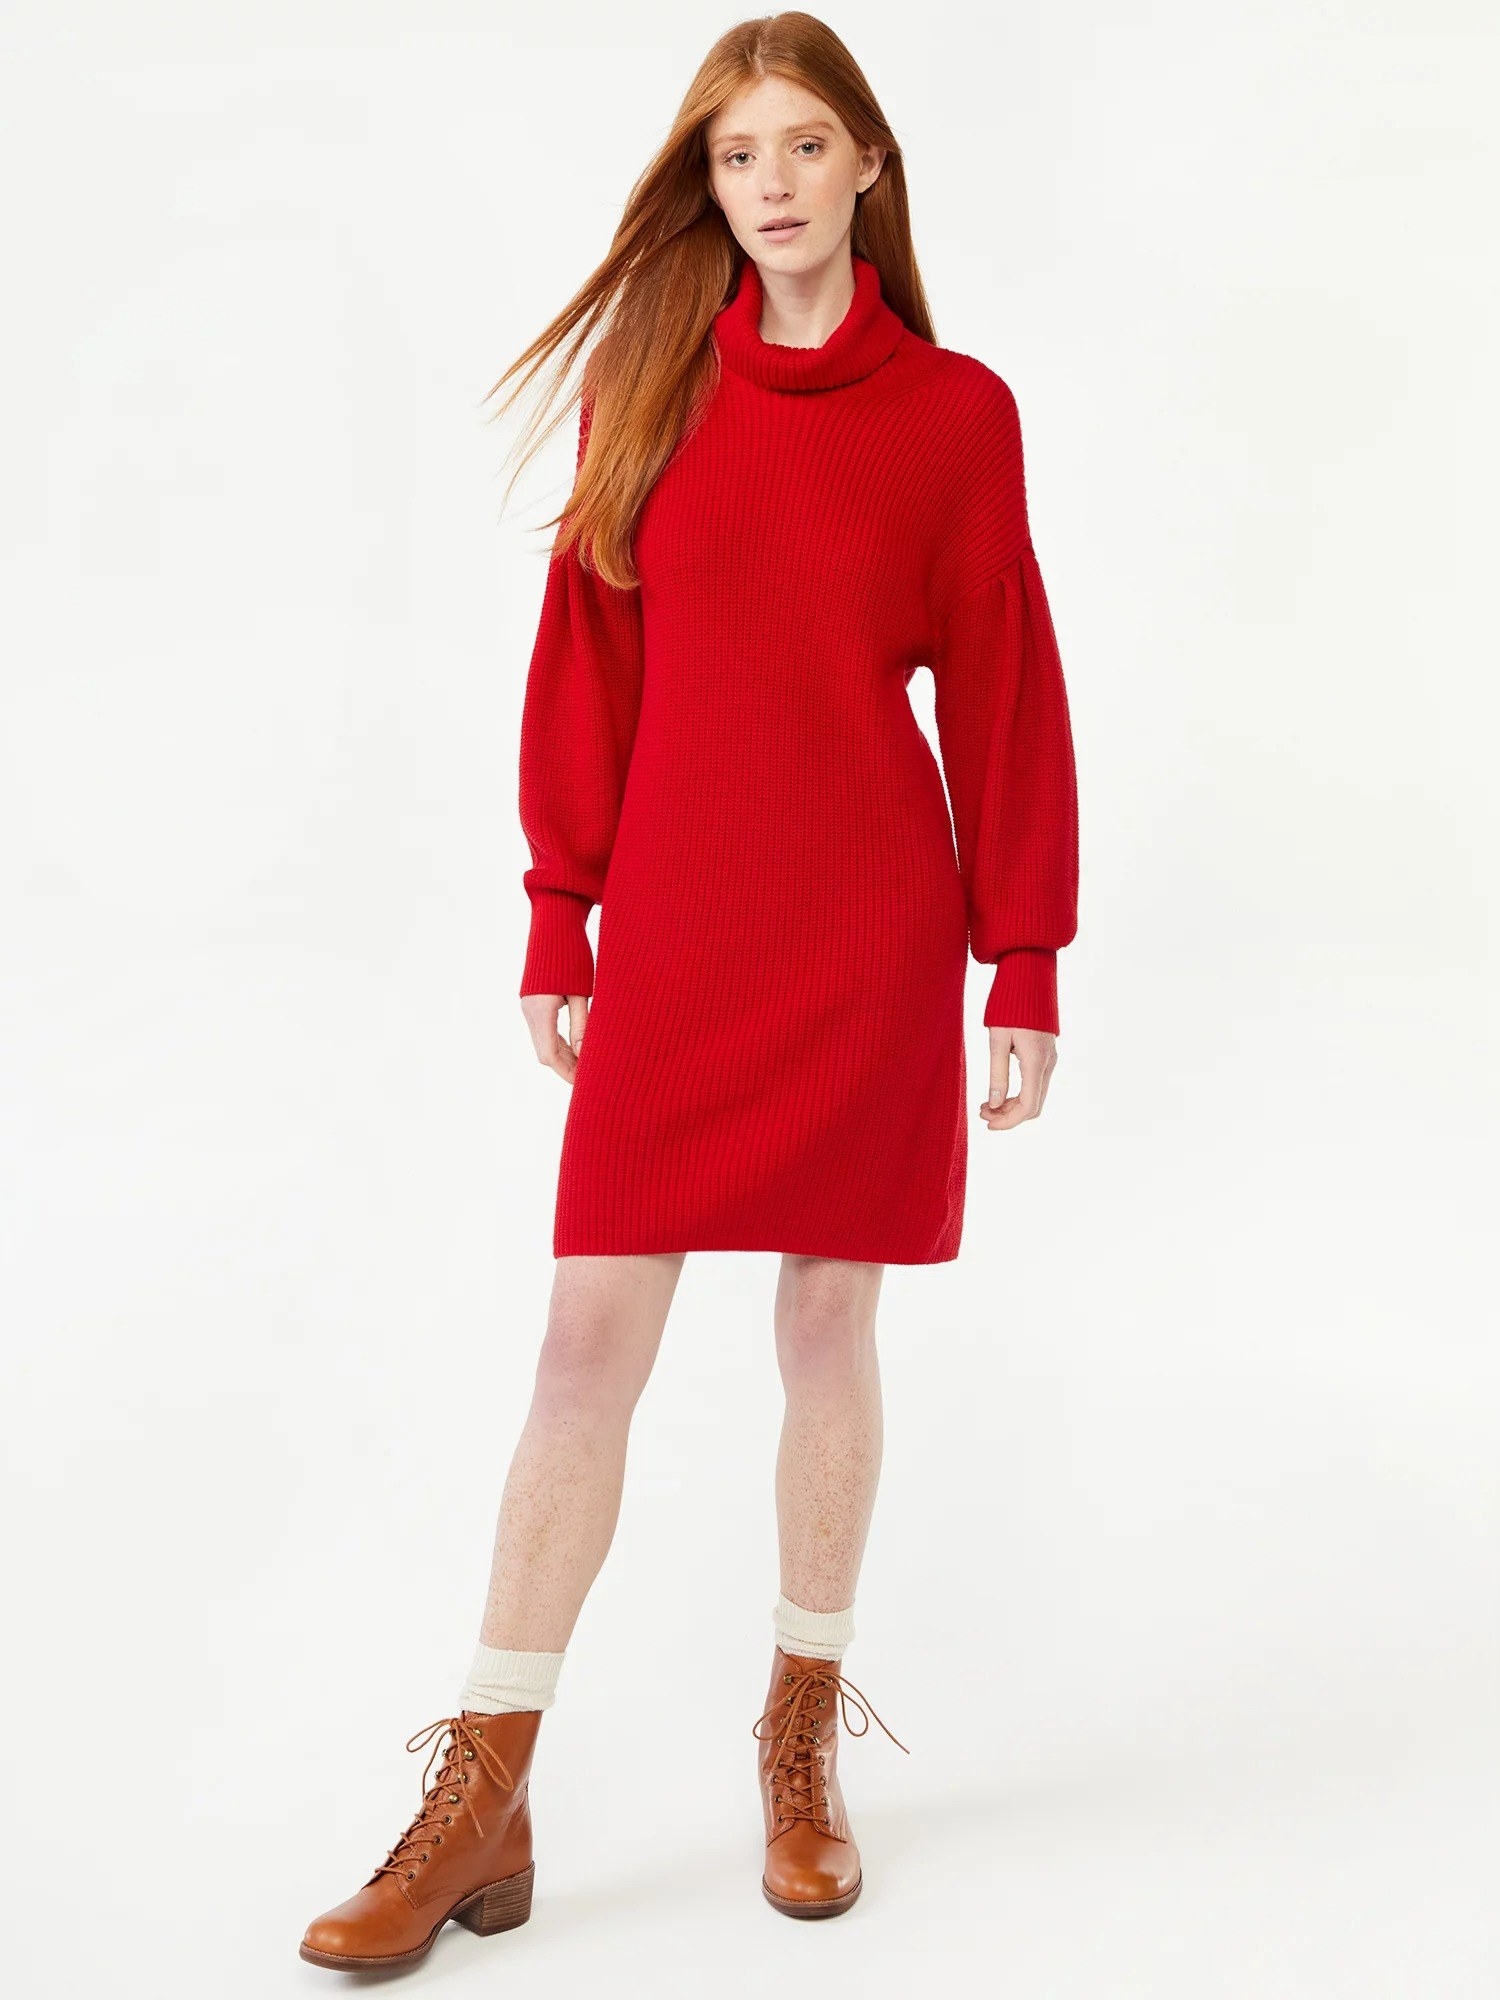 a model wearing the red sweater dress